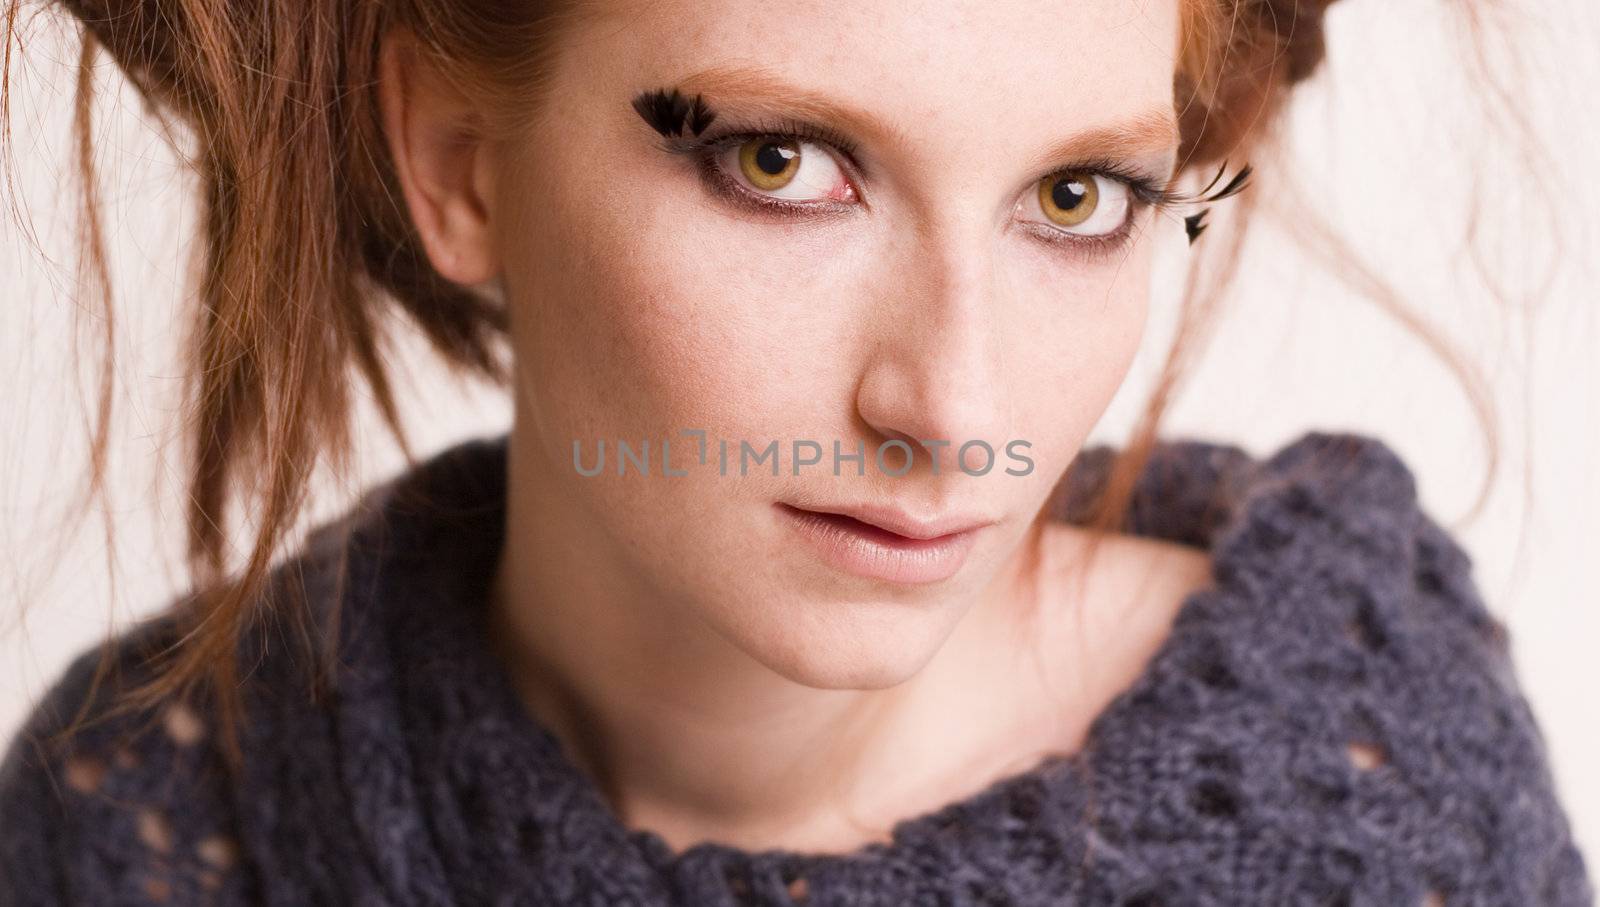 Studio portrait of a natural redhead with hypnotic green eyes